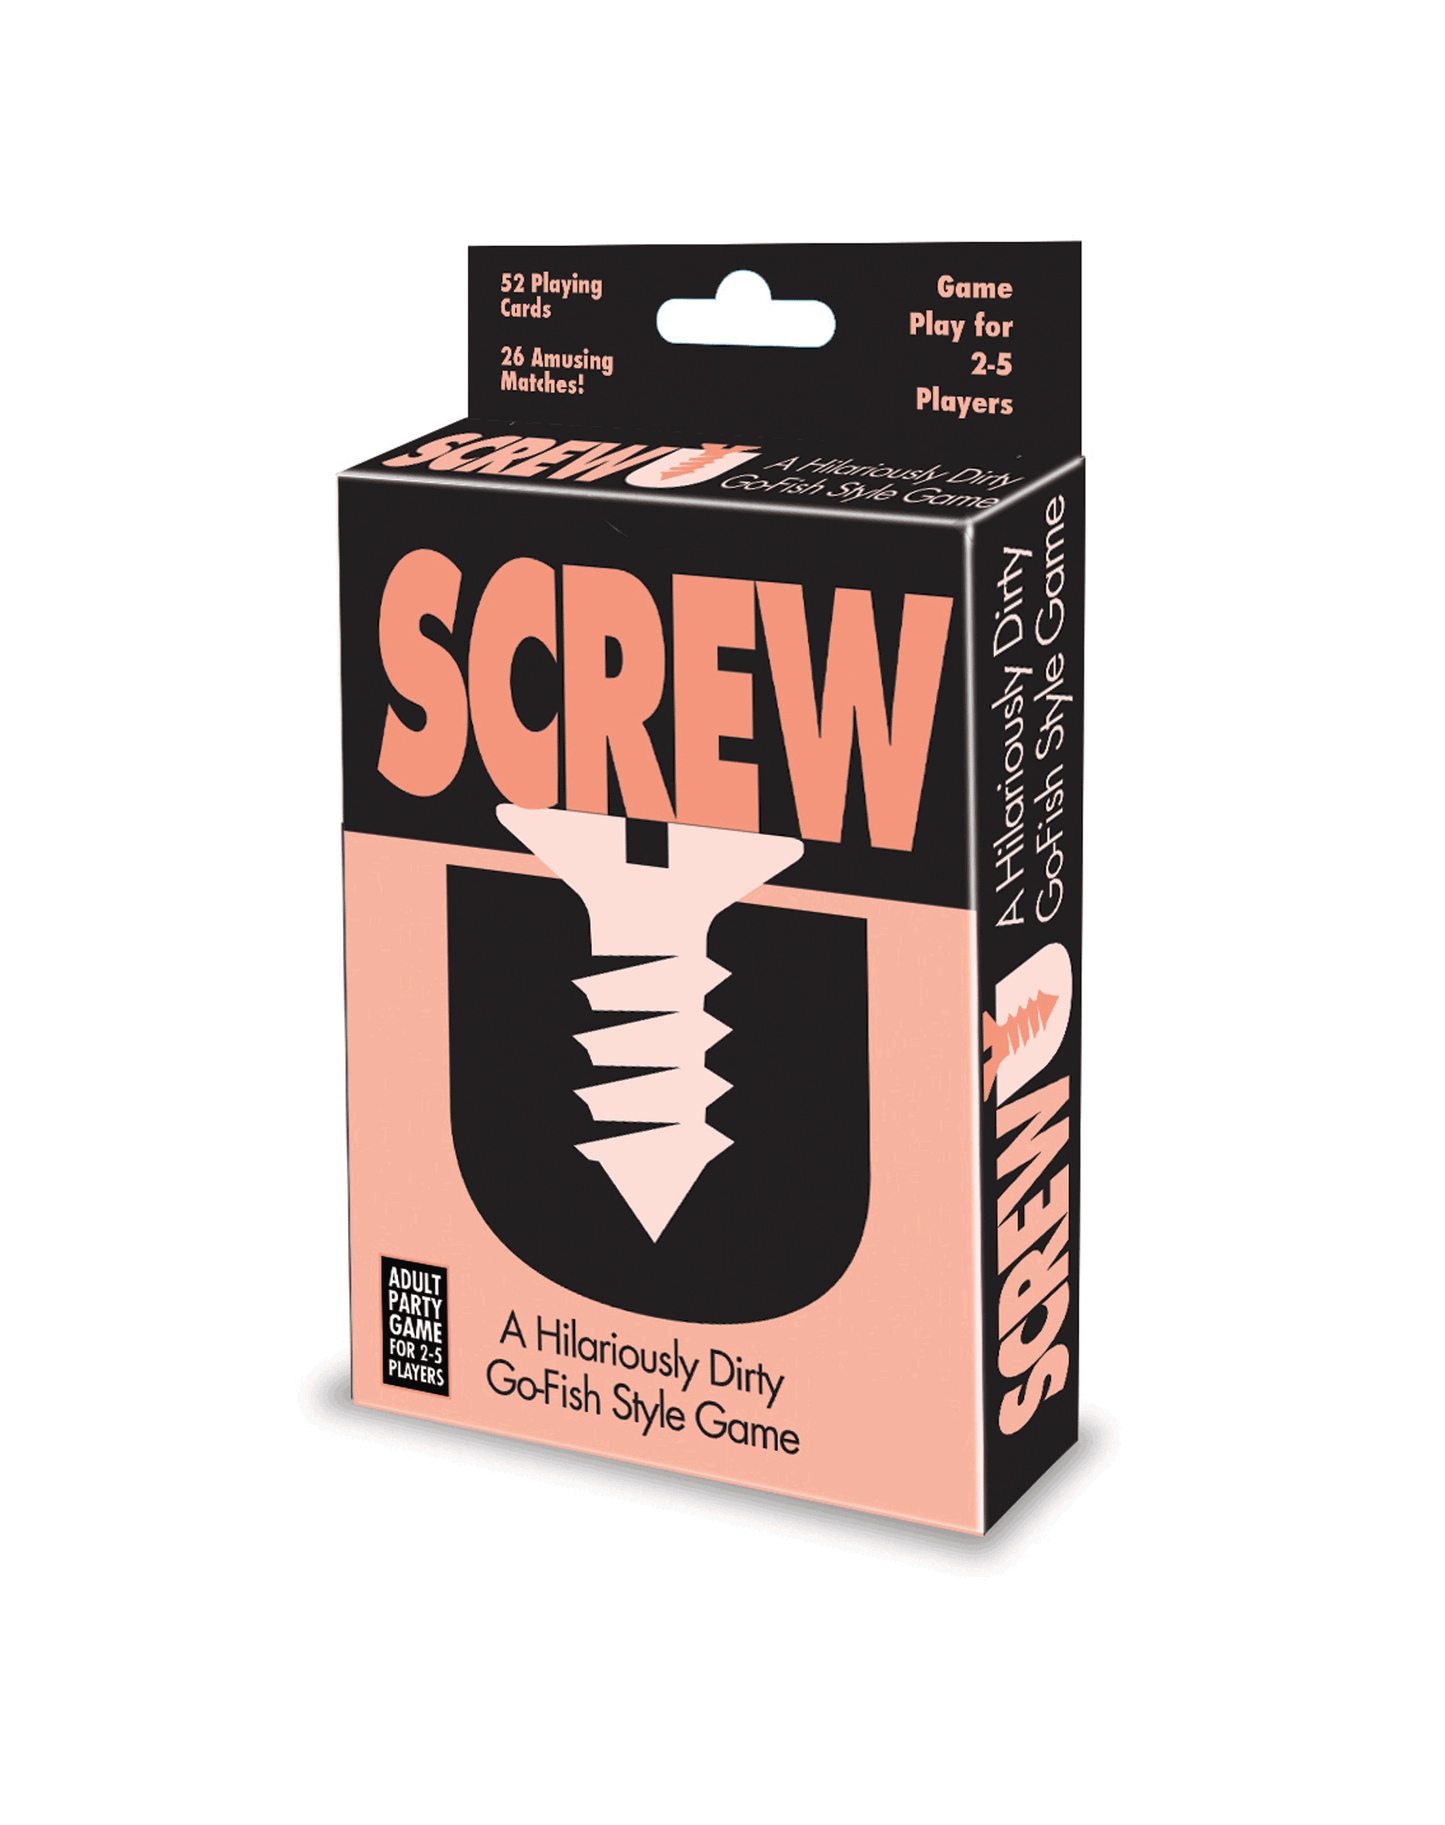 Screw U - Go Fish Style Card Game for Adults